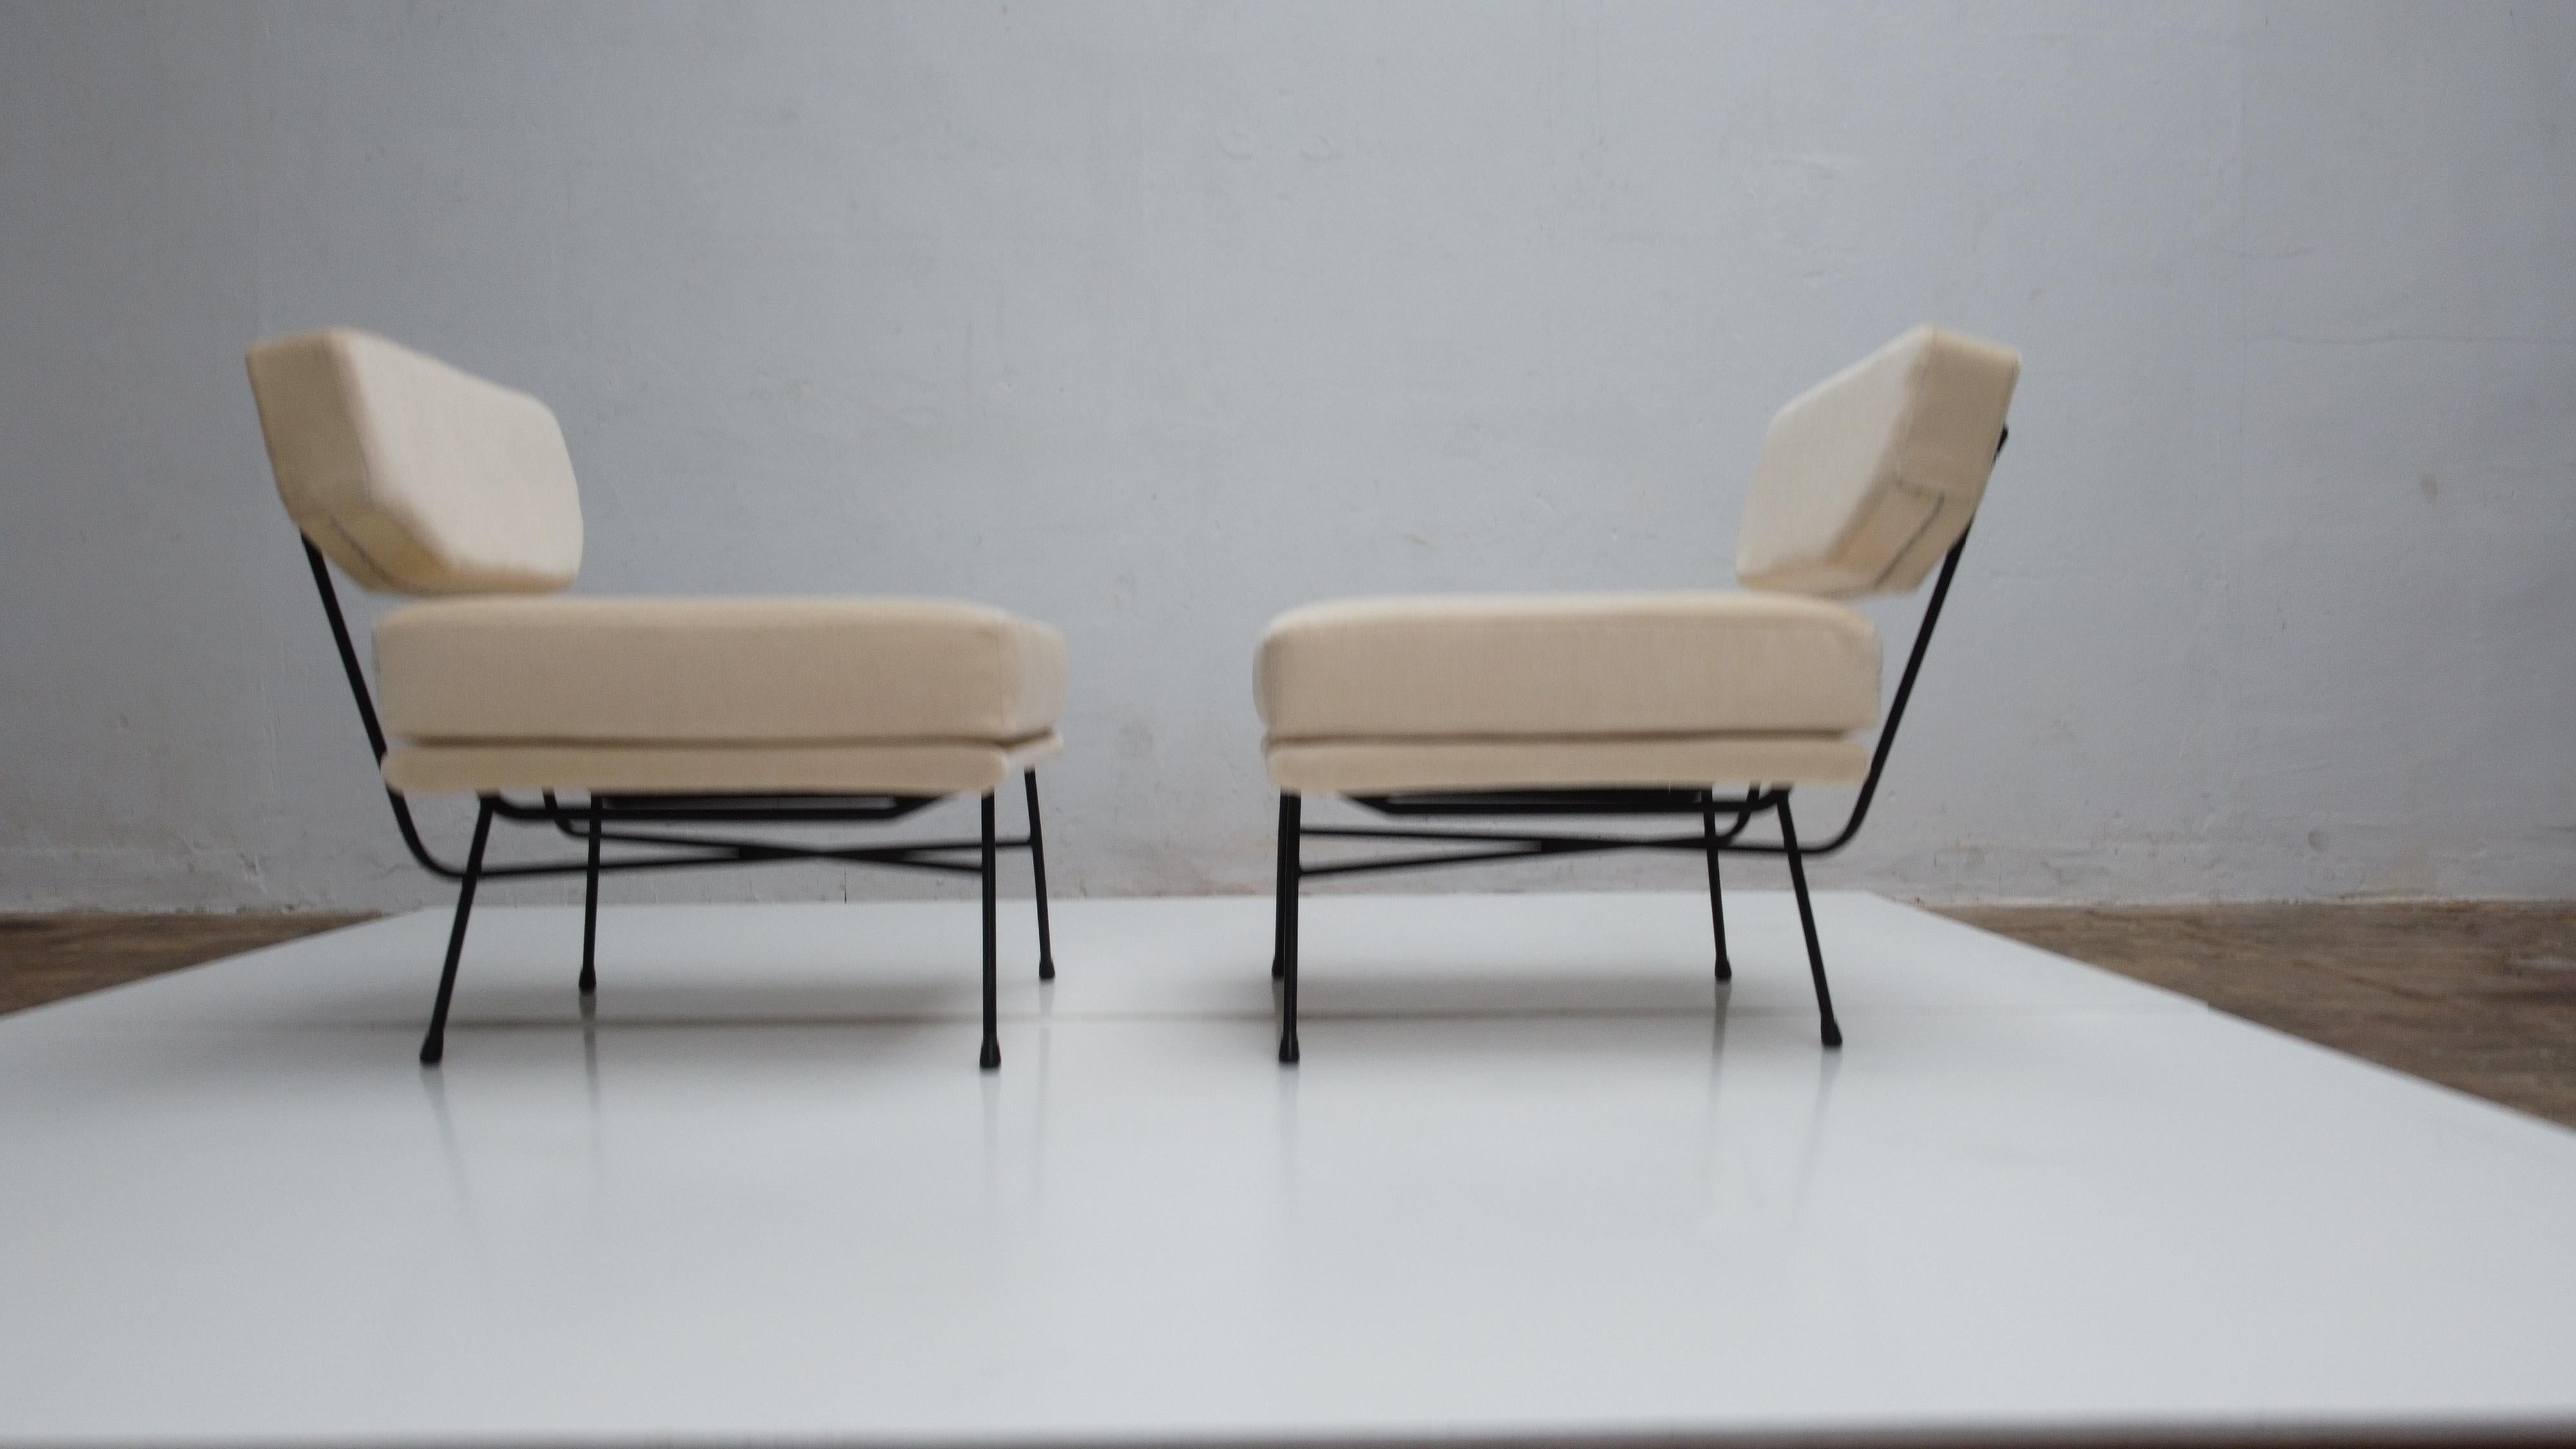 Pair of 'Elettra' Lounge Chairs by BBPR, Arflex, Italy 1953, Compasso D'Oro 1954 2